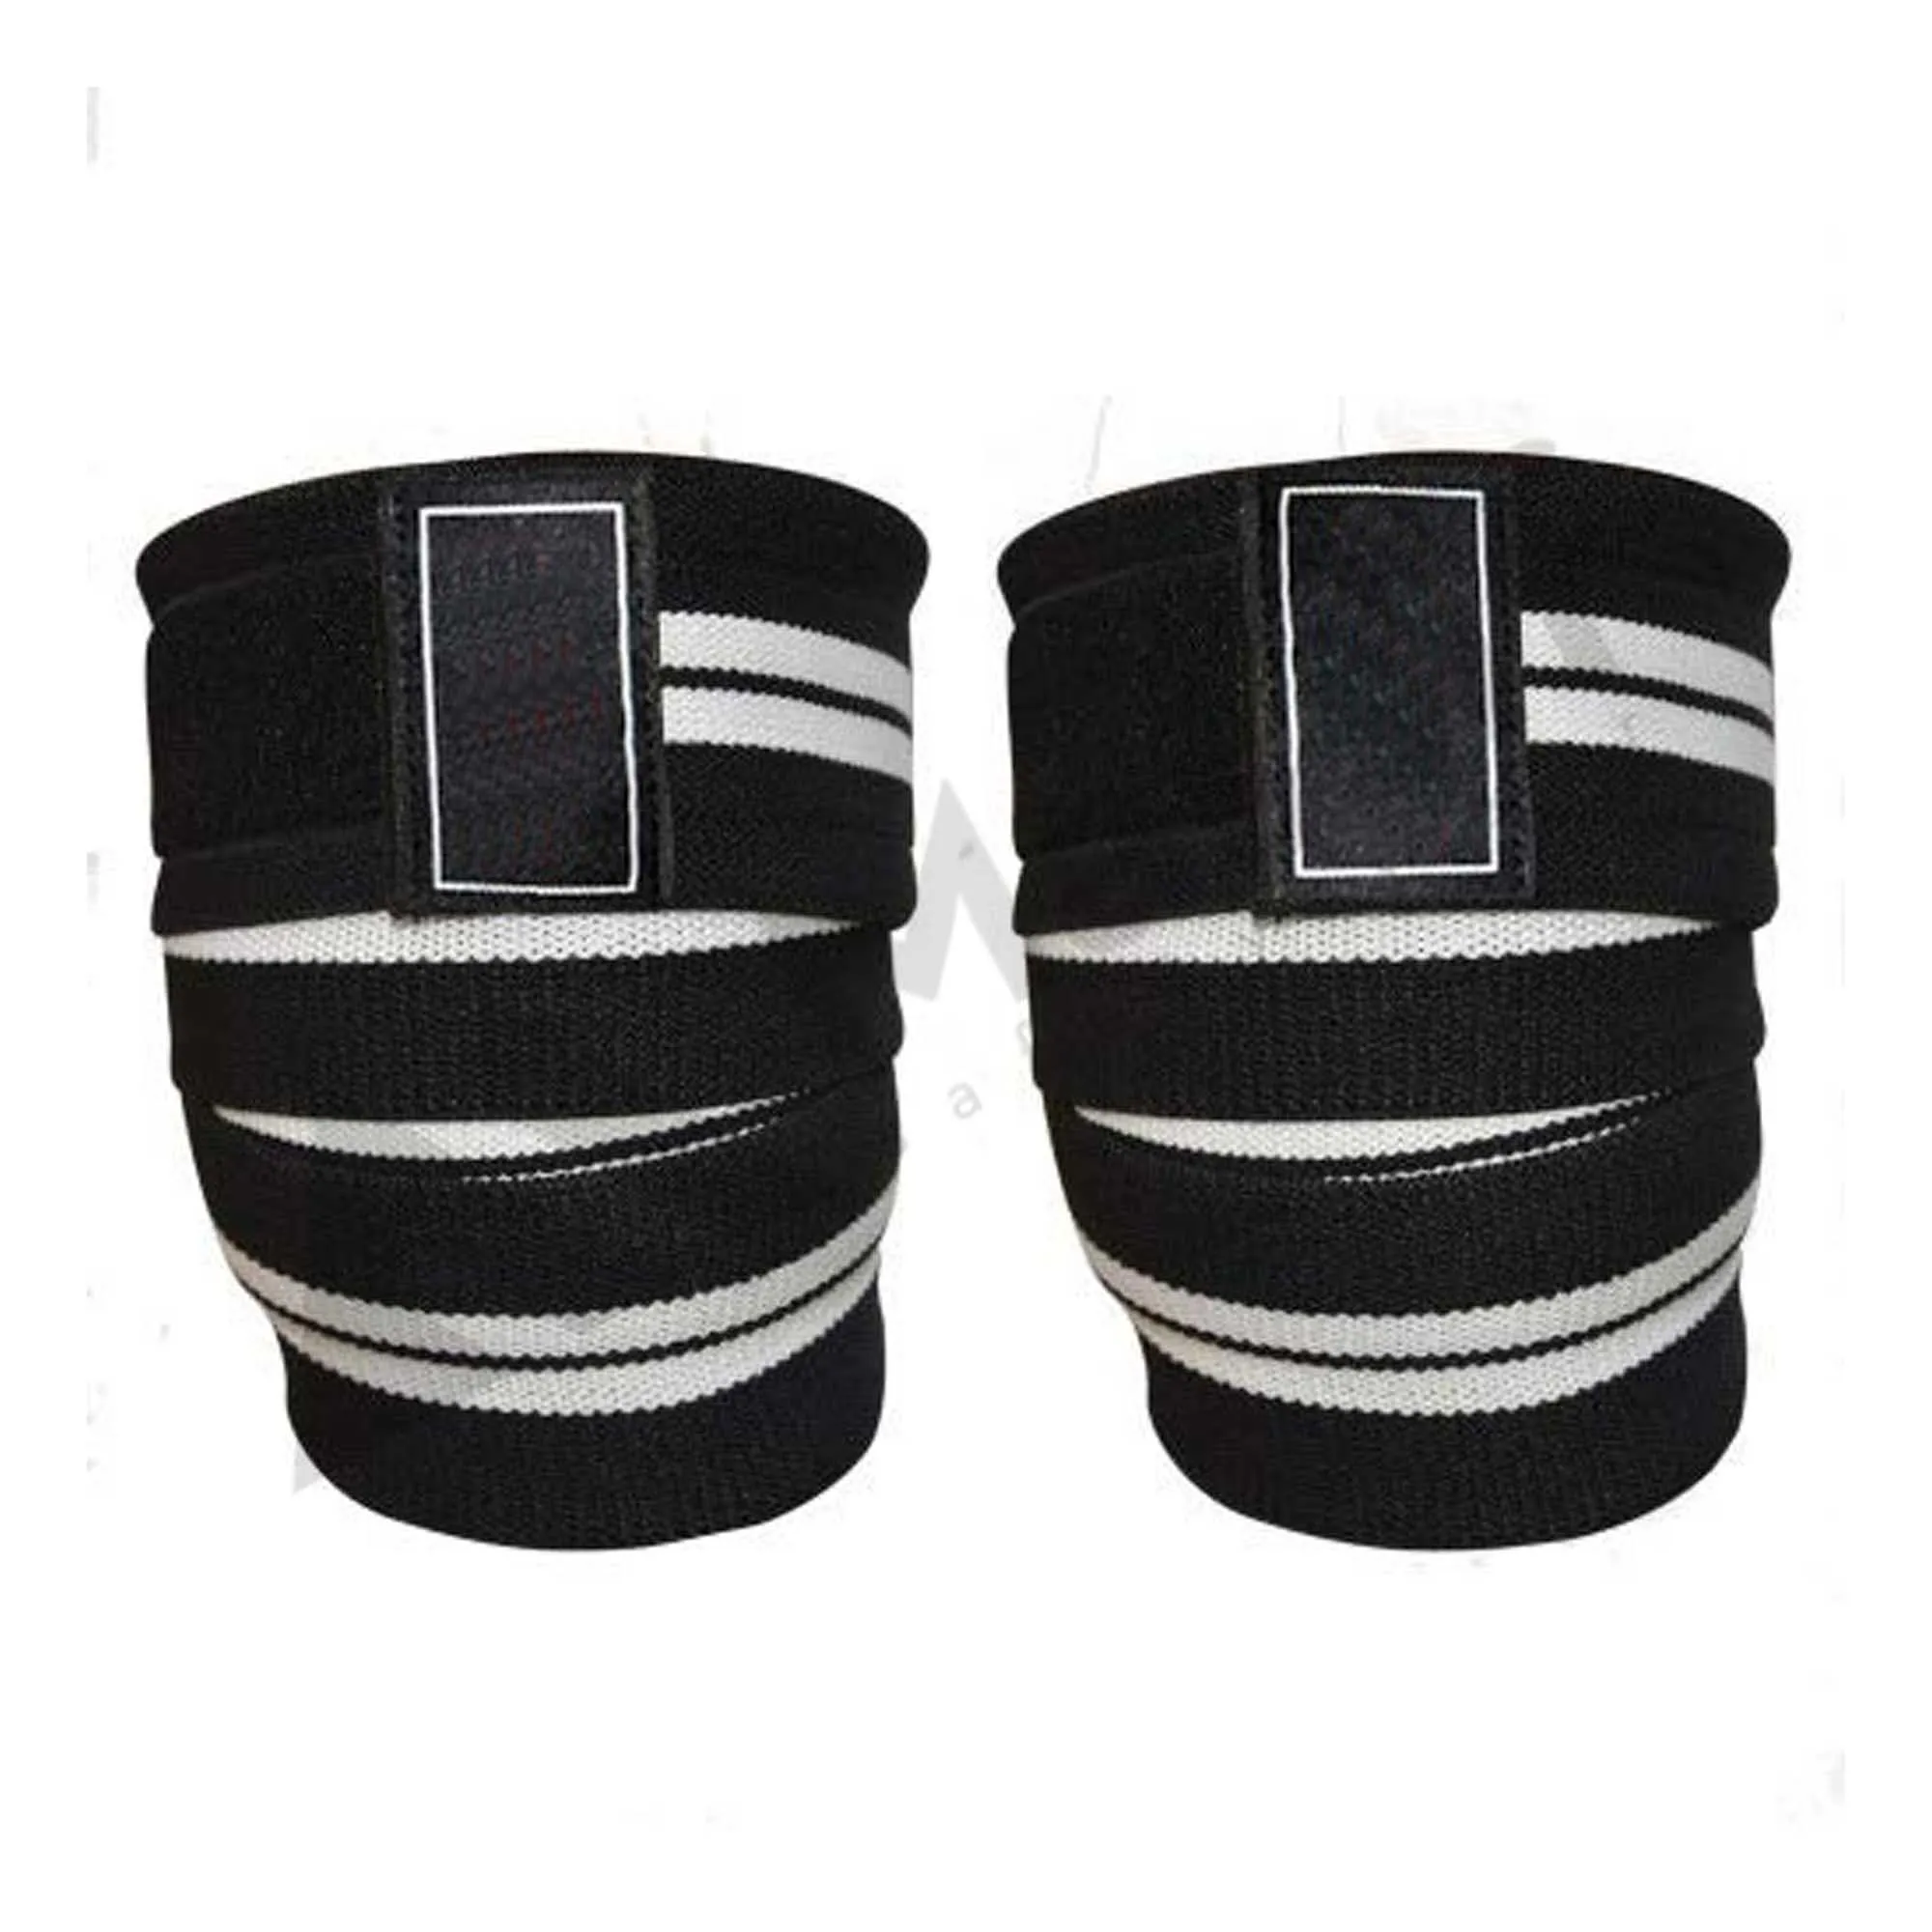 POWER LIFTING WRIST & KNEE WRAPS BRACE POWER GYM STRAP HAND AND KNEE SUPPORT 